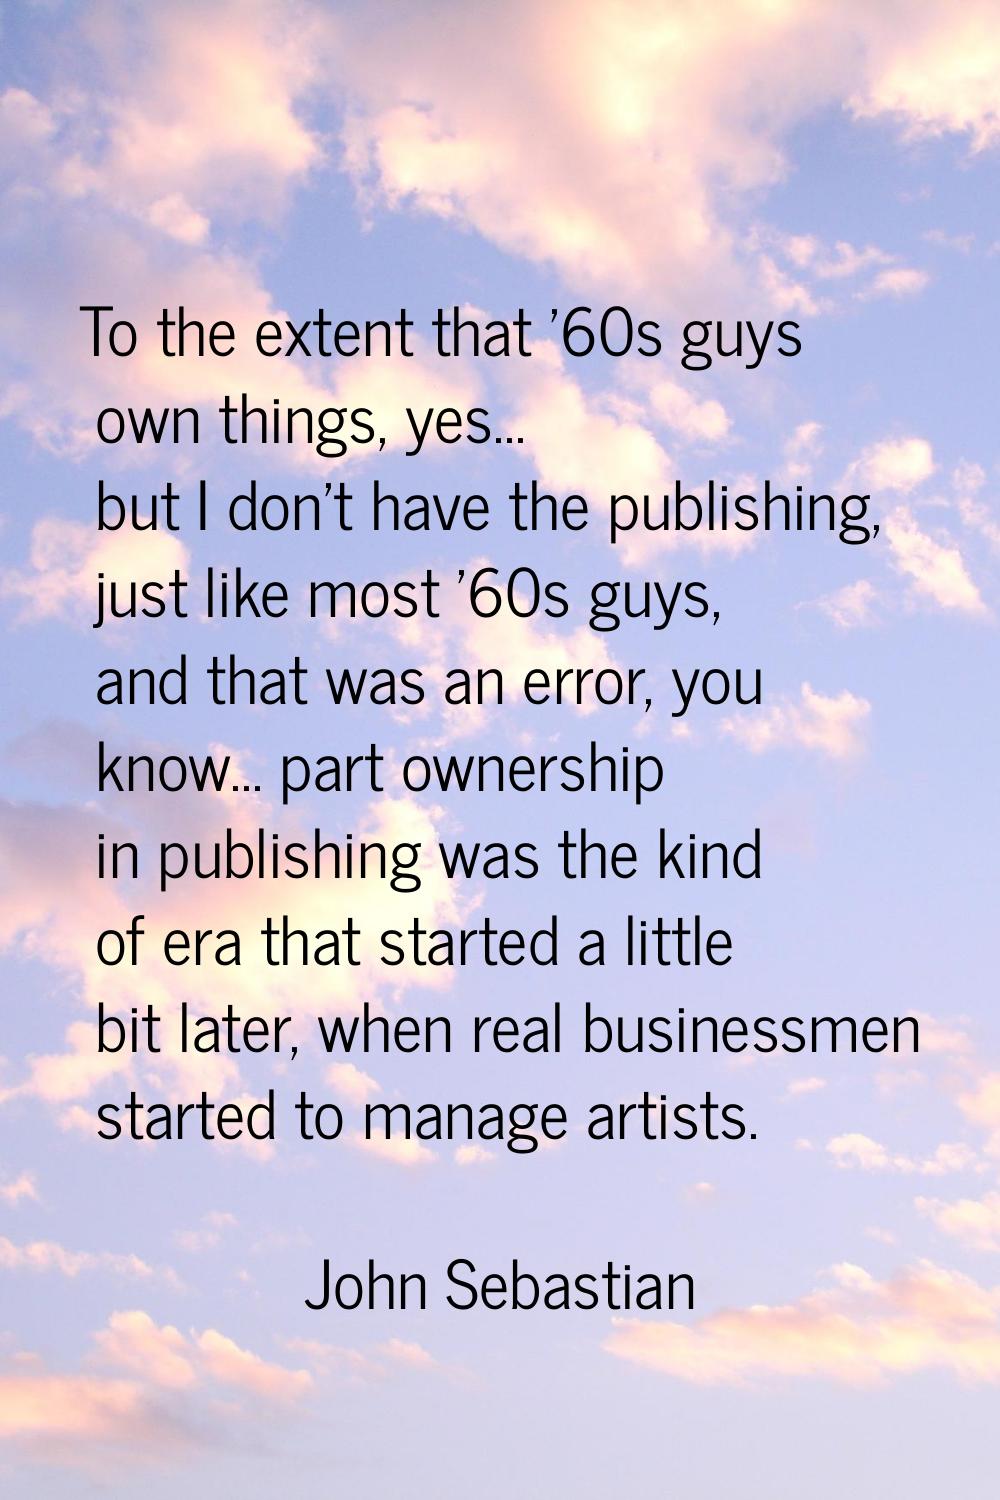 To the extent that '60s guys own things, yes... but I don't have the publishing, just like most '60